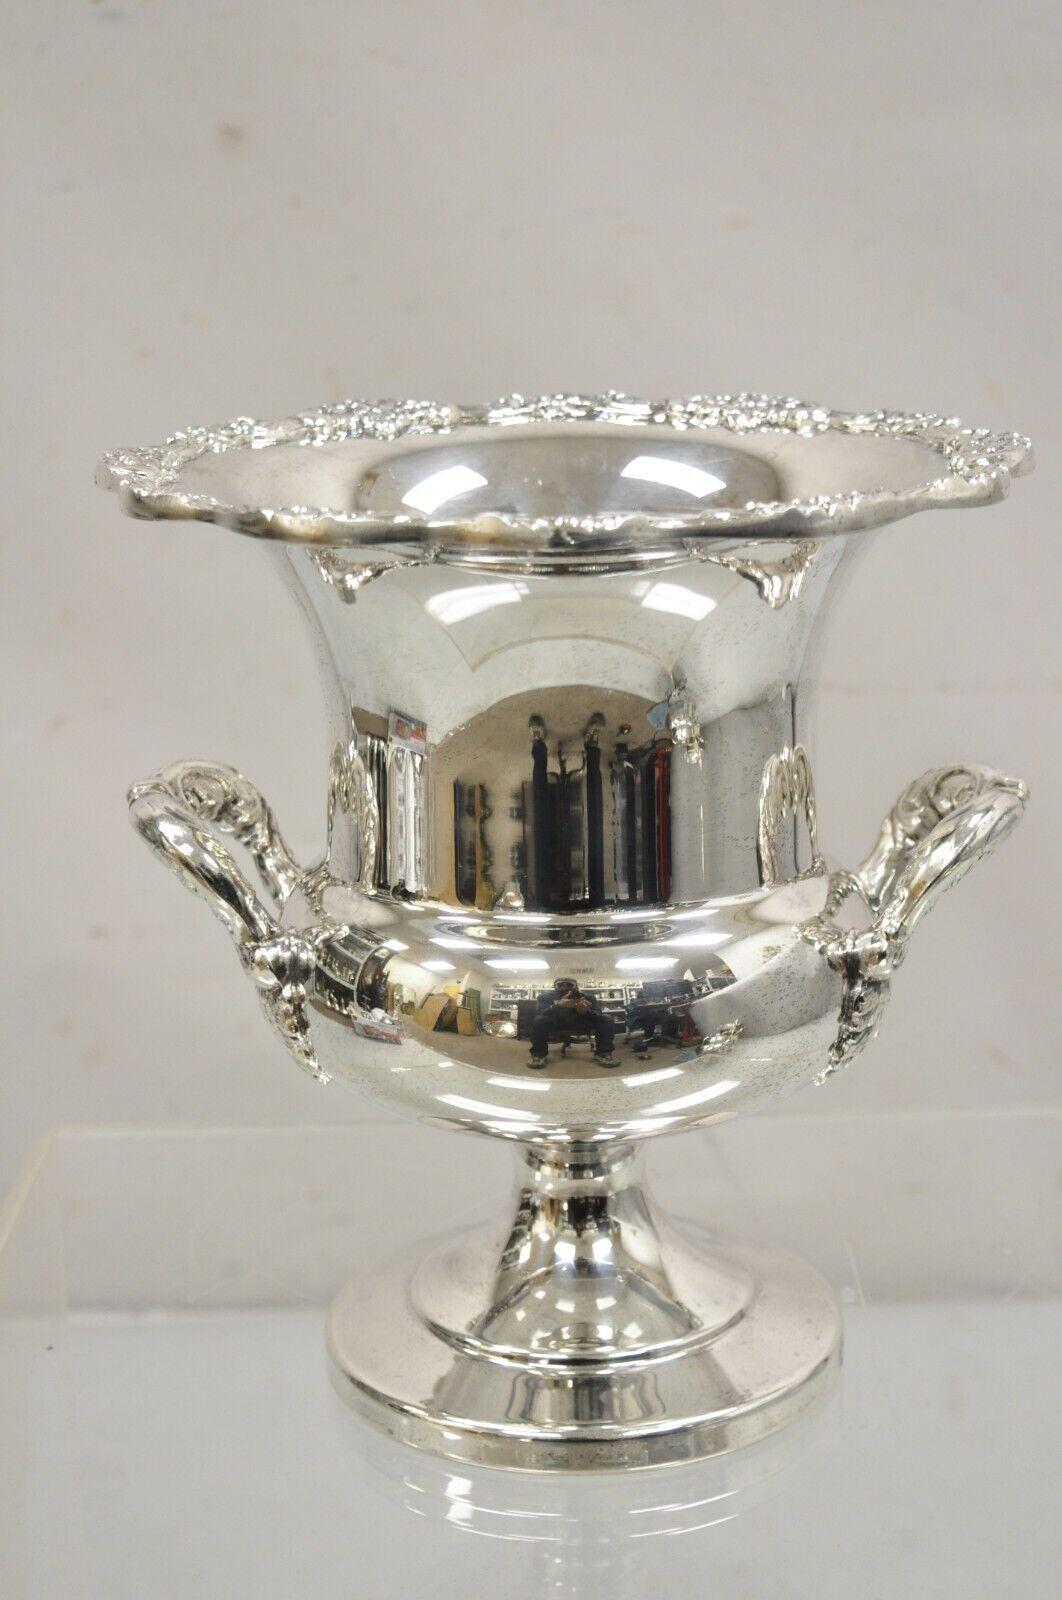 Vintage Towle Regency Style Silver Plated Trophy Cup Ice Bucket Champagne Chiller. Circa Mid 20th Century. Dimensions : 10